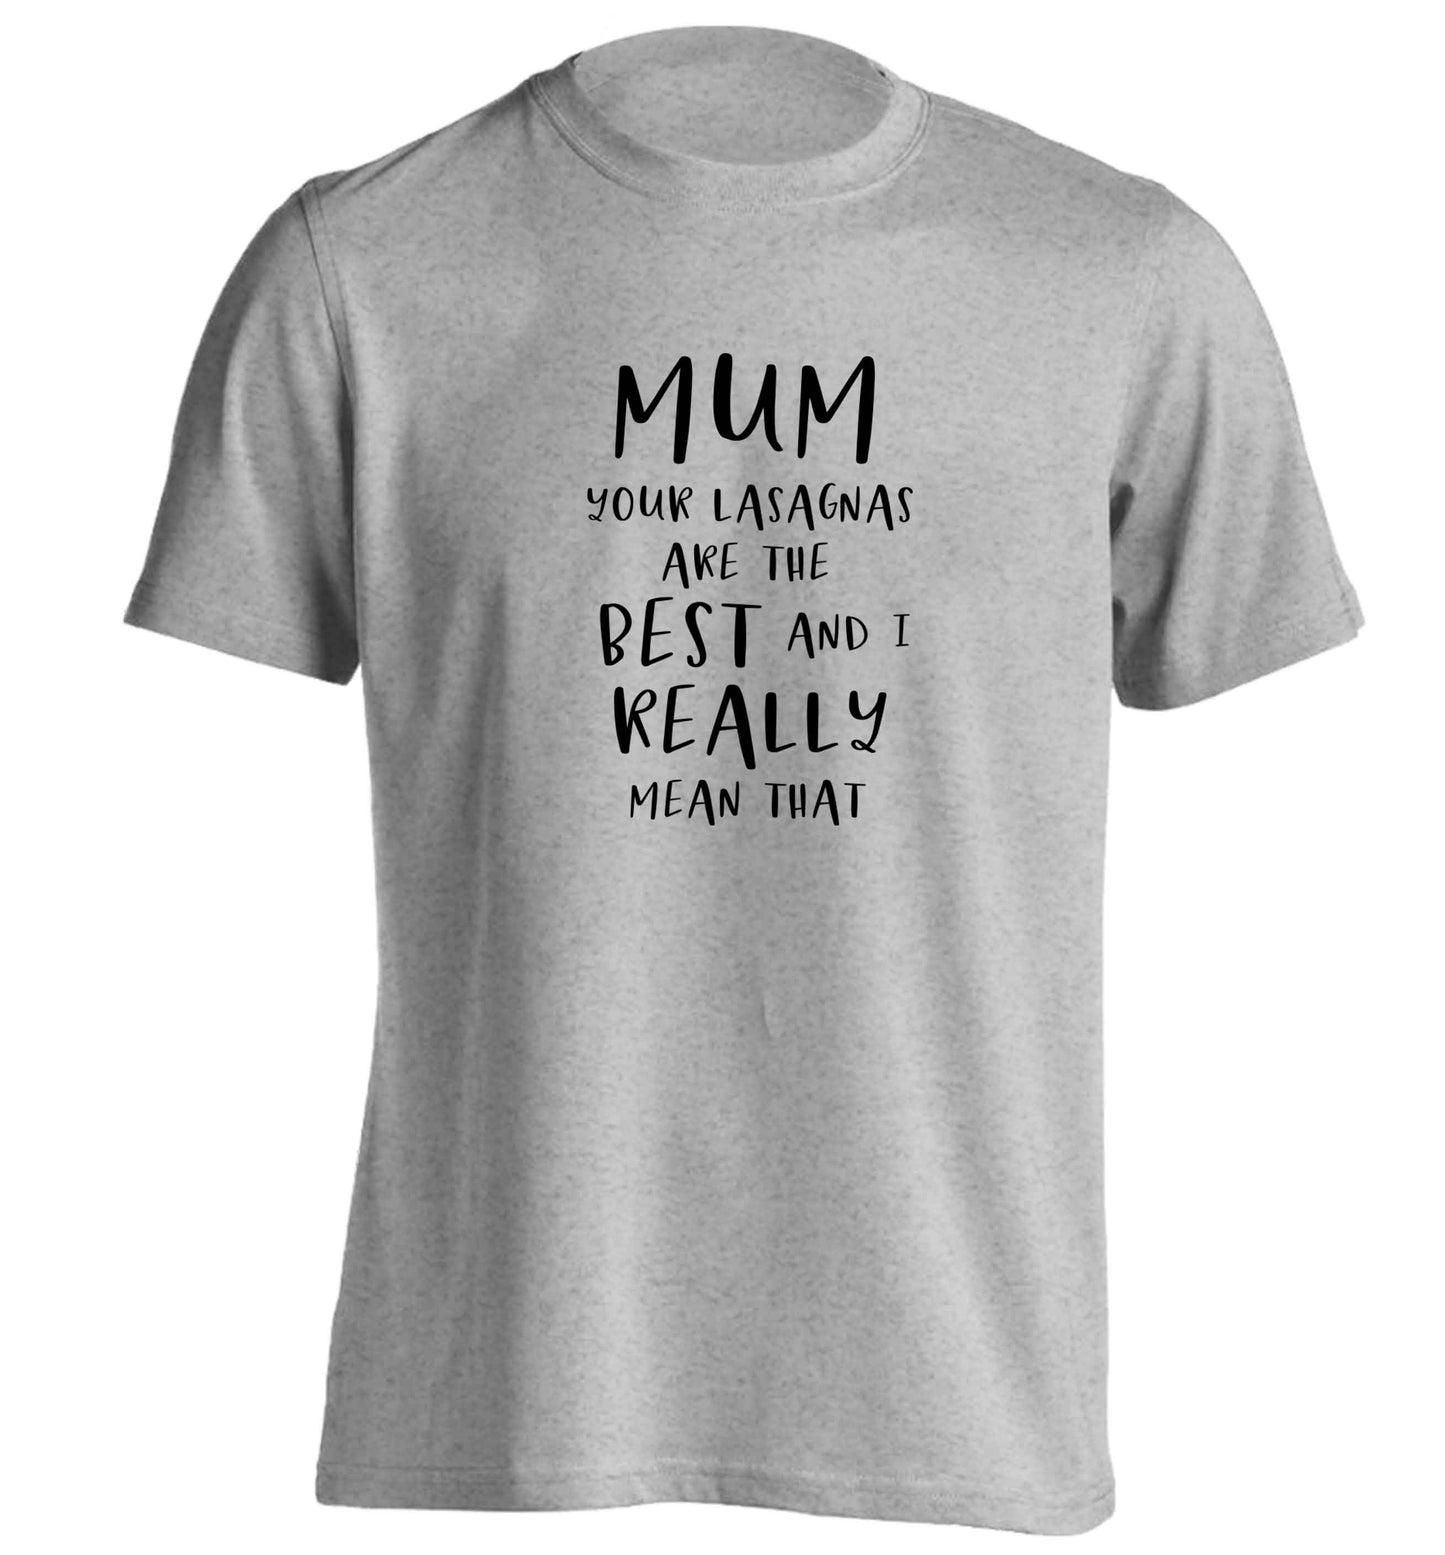 Funny gifts for your mum on mother's dayor her birthday! Mum your lasagnas are the best and I really mean that adults unisex grey Tshirt 2XL